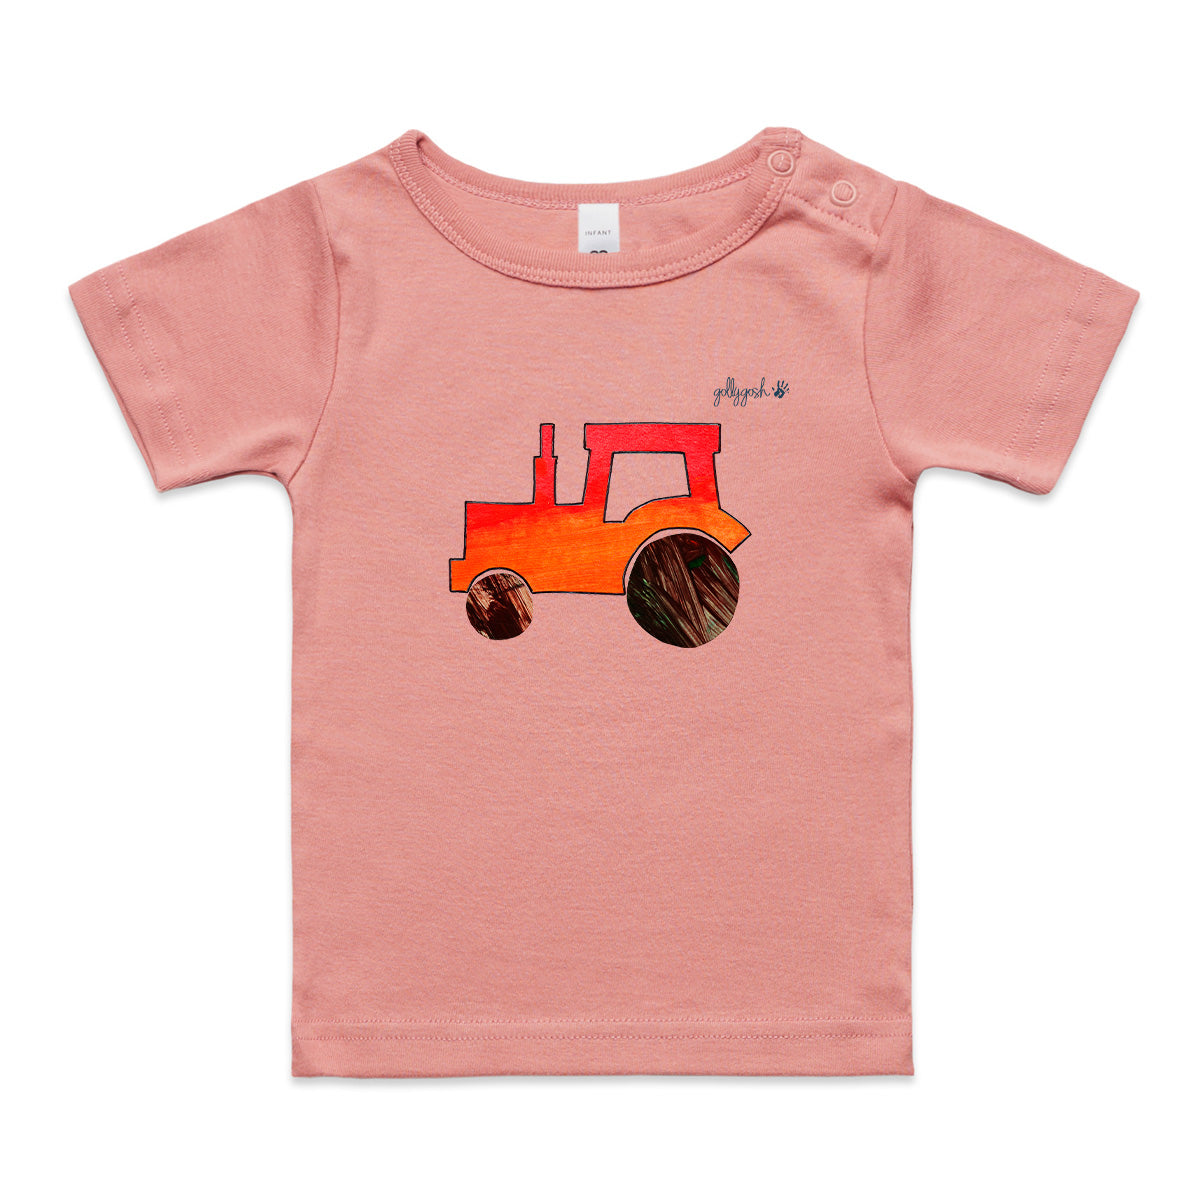 Tractor - Infant Wee Tee